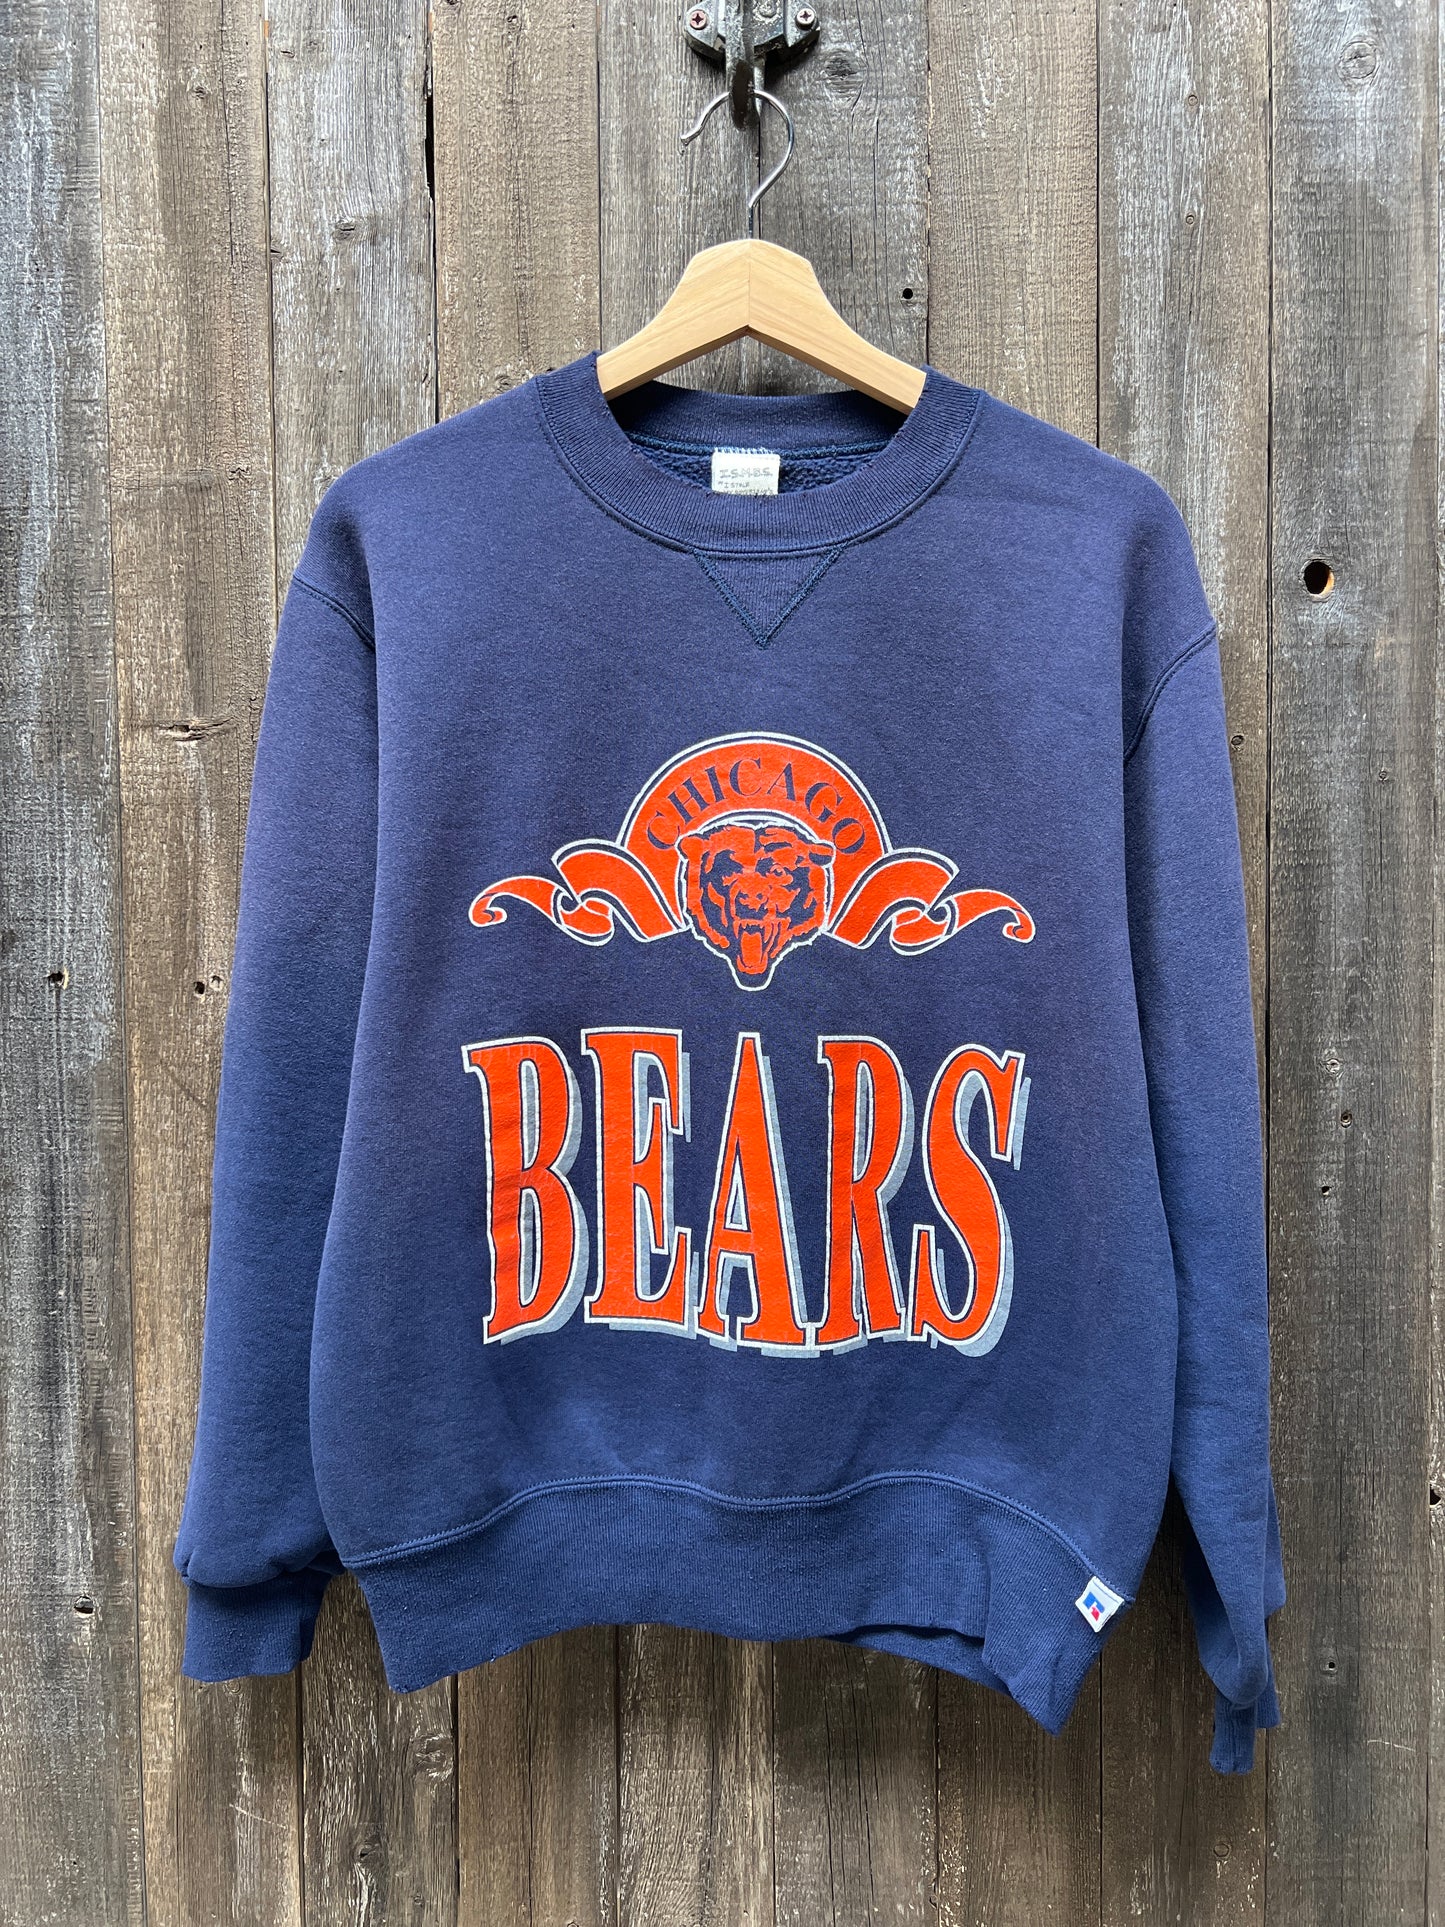 Chicago Bears Sweatshirt -S/M-Customize Your Embroidery Wording